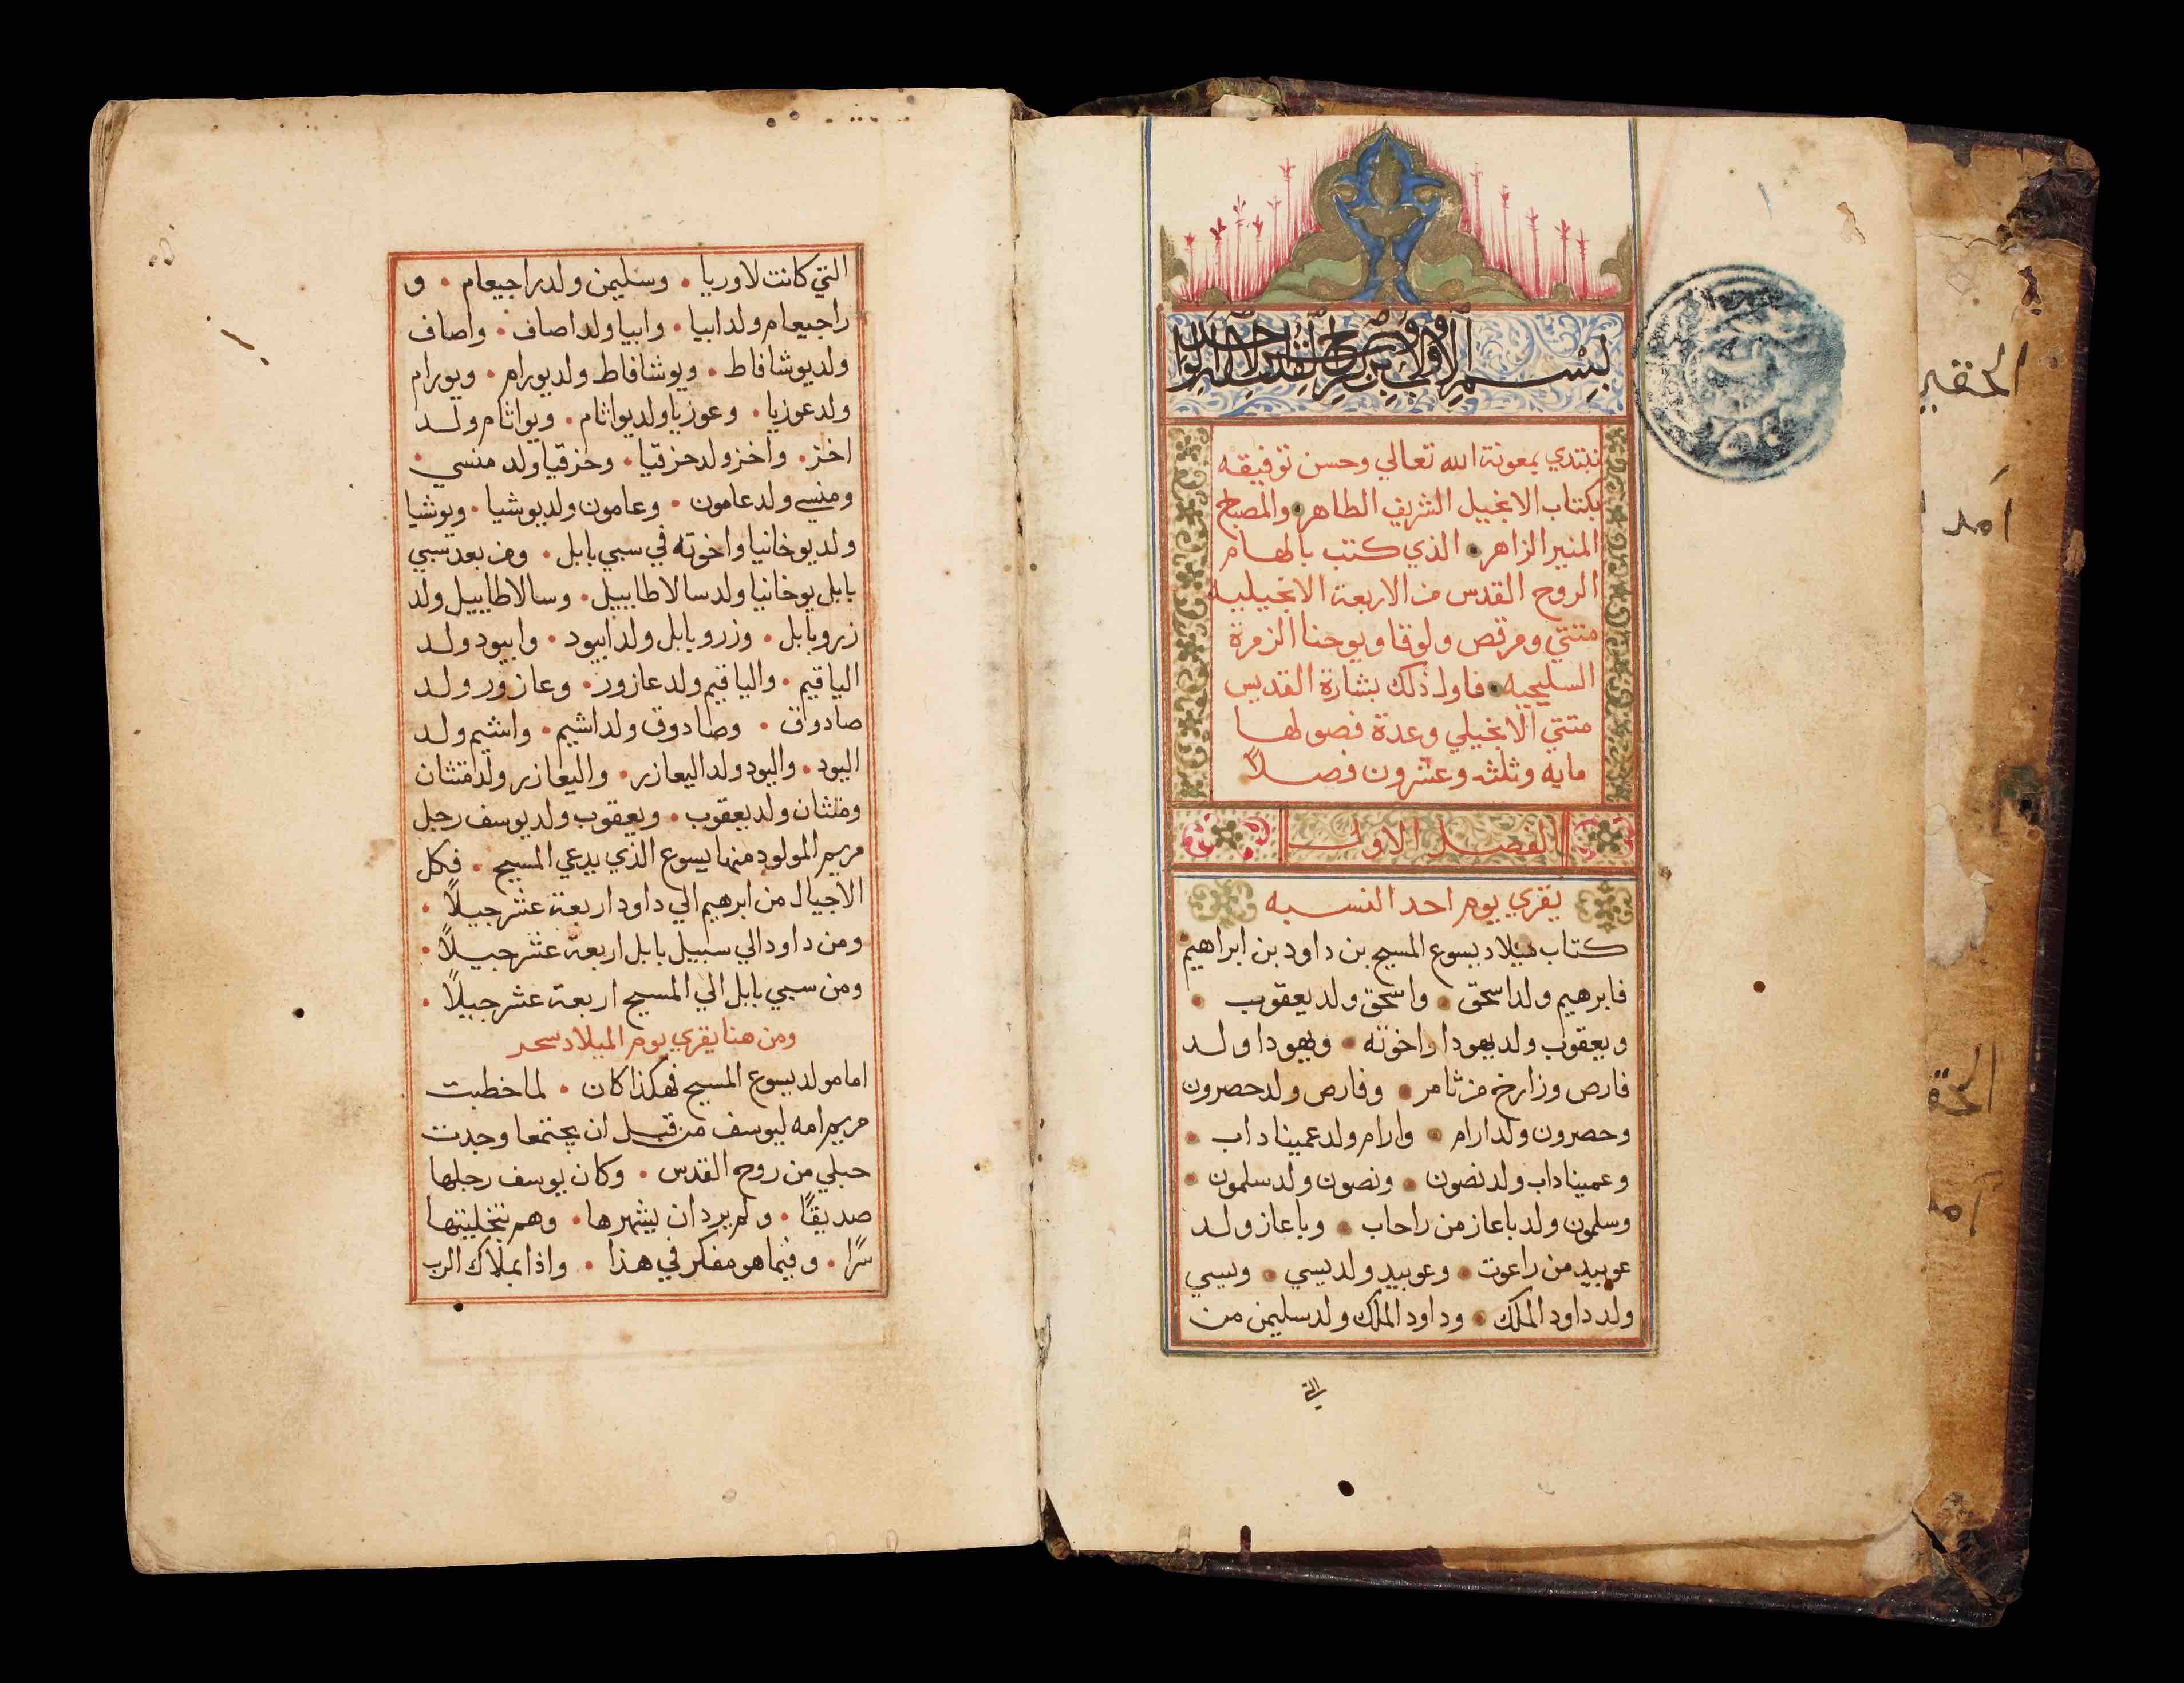 Gospel book in Arabic from the Ordre Basilien Alepin collection, Sarba (Jūniyah) (<a href='https://w3id.org/vhmml/readingRoom/view/120263'>OBA 4</a>)